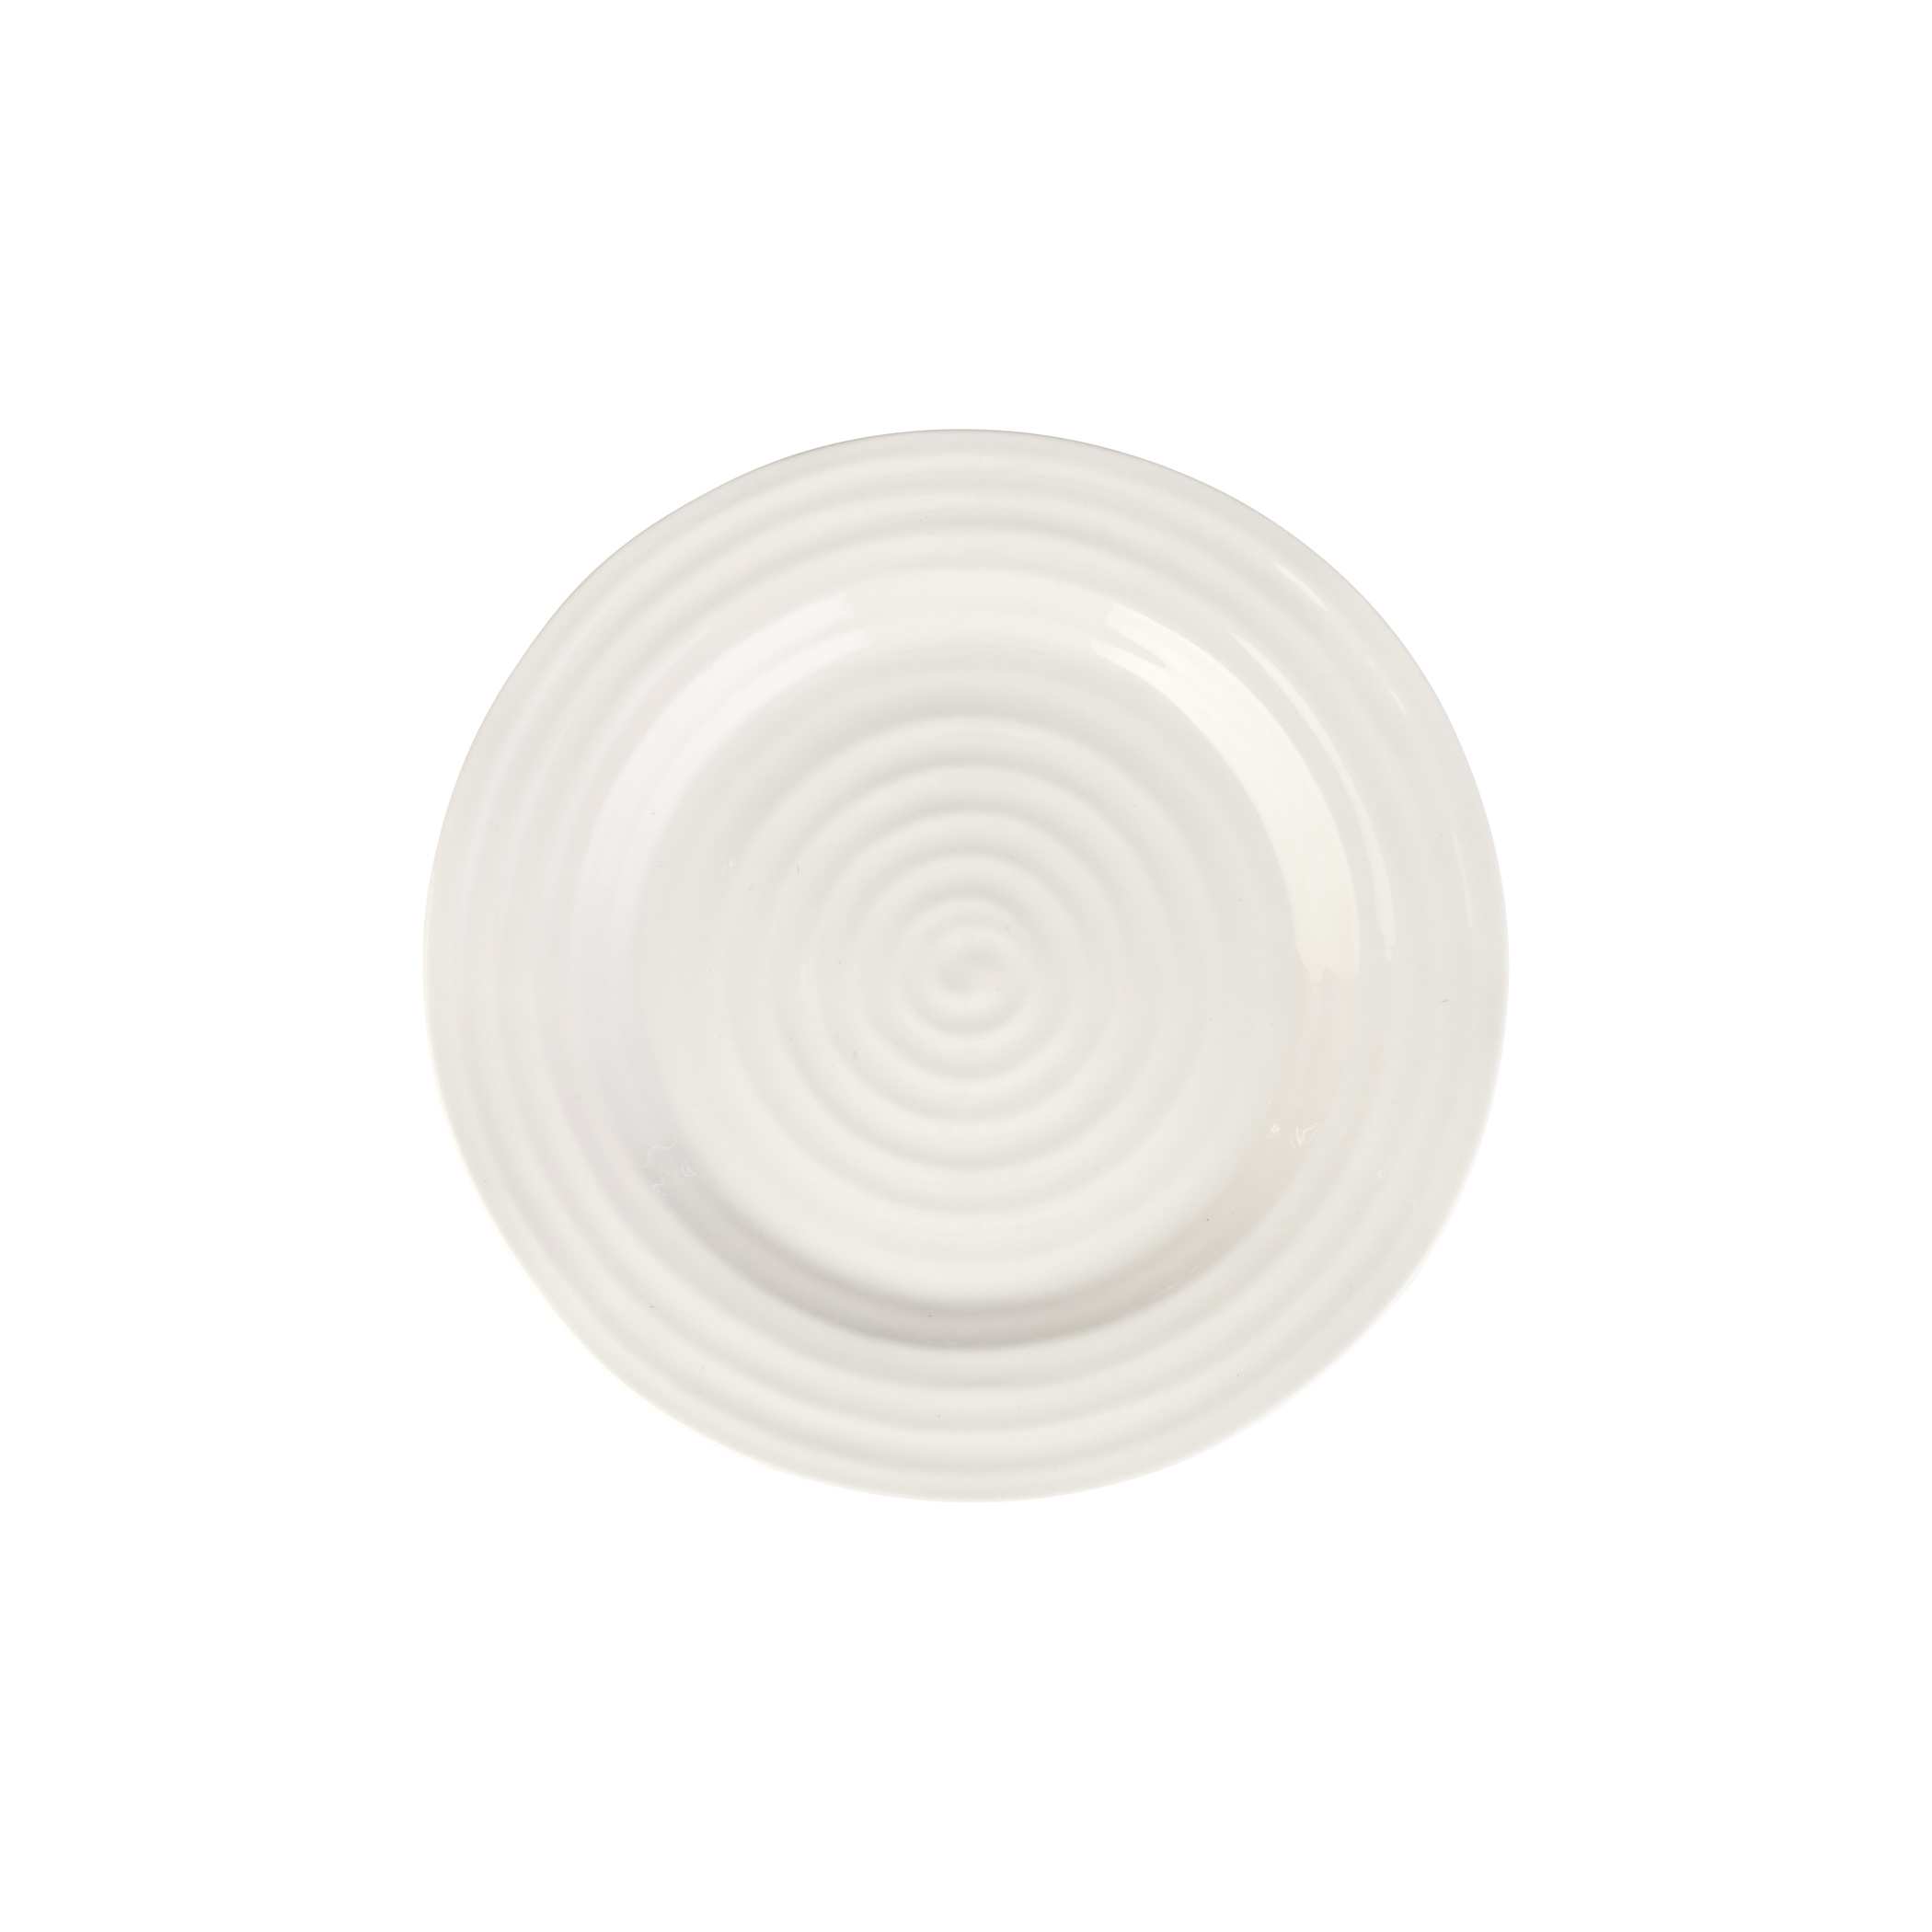 Sophie Conran White Set of 4 Dinner Plates image number null